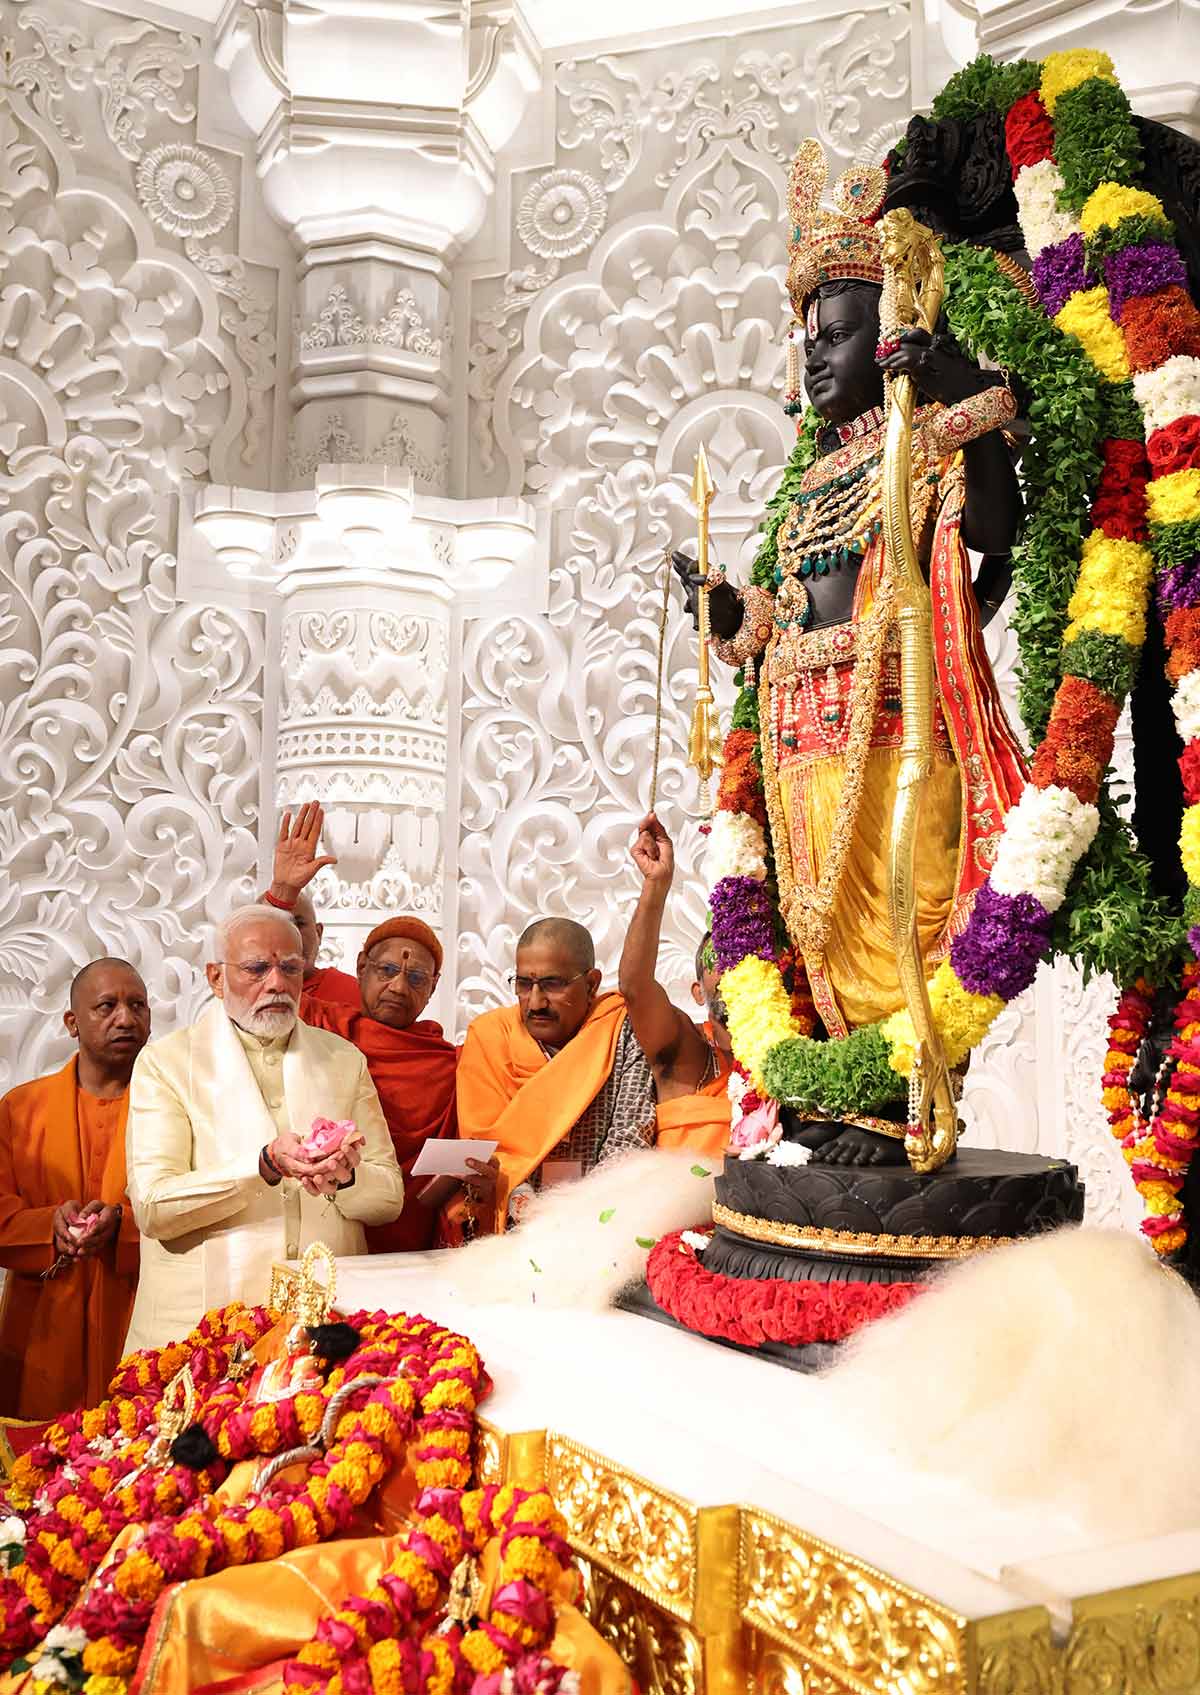 'Prime Minister Has Become High Priest Of Hinduism'